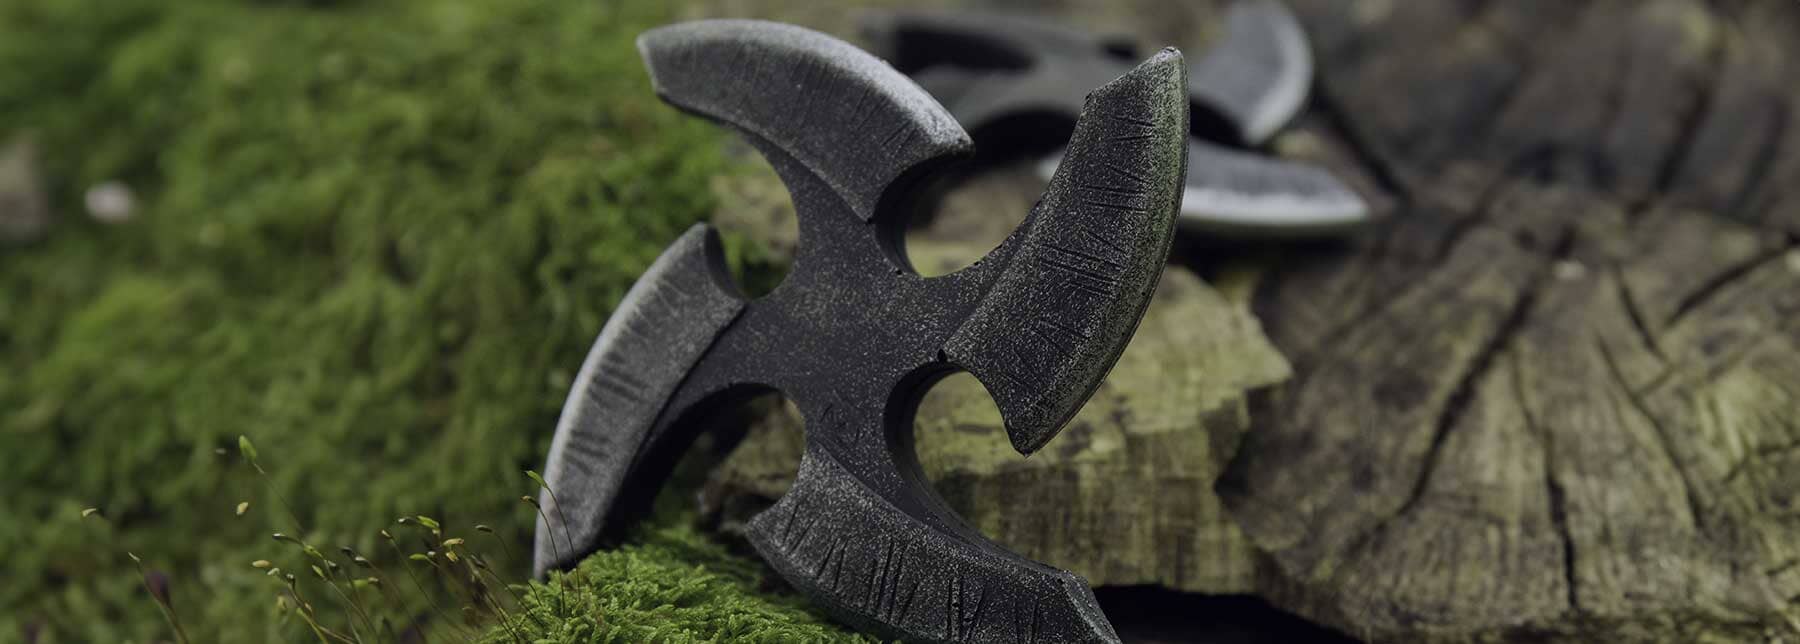 Throwing Knives for LARP